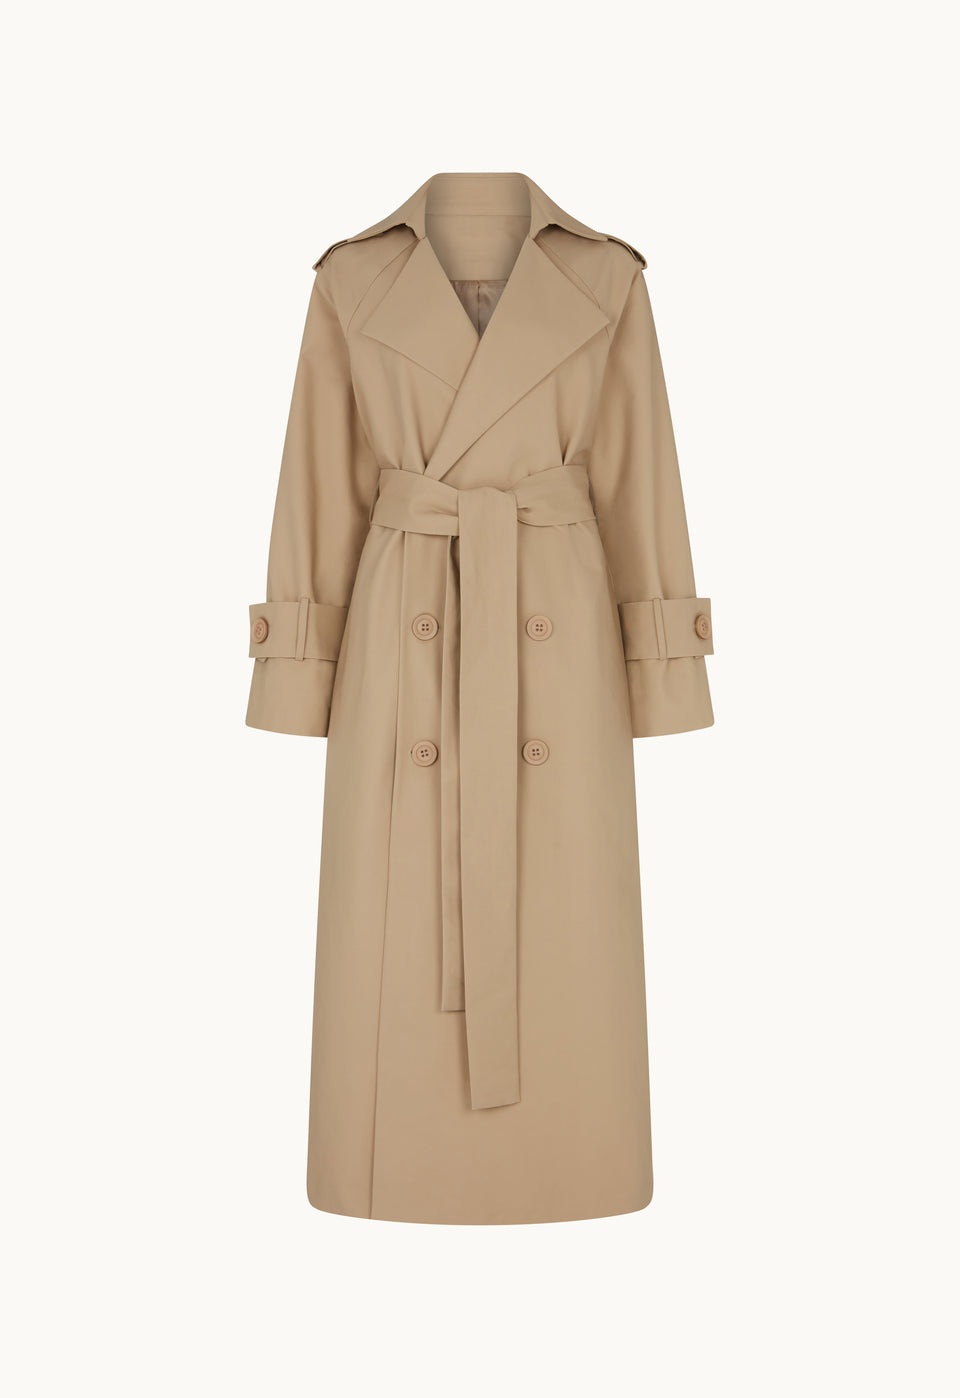 Cotton Trench Coat in Tan